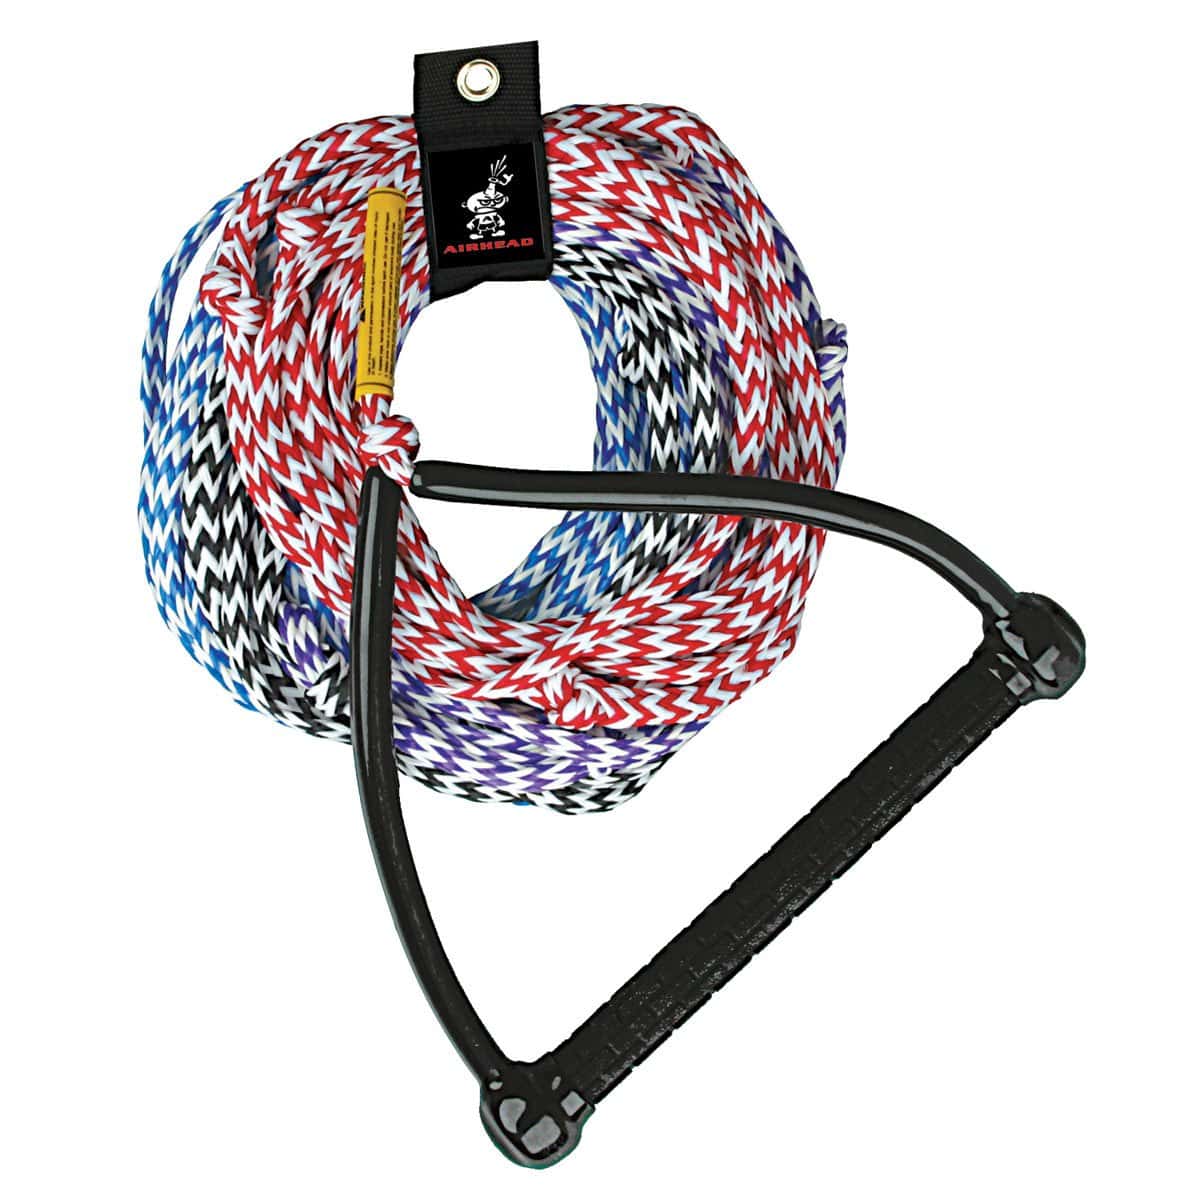 4 Section Water Ski Rope